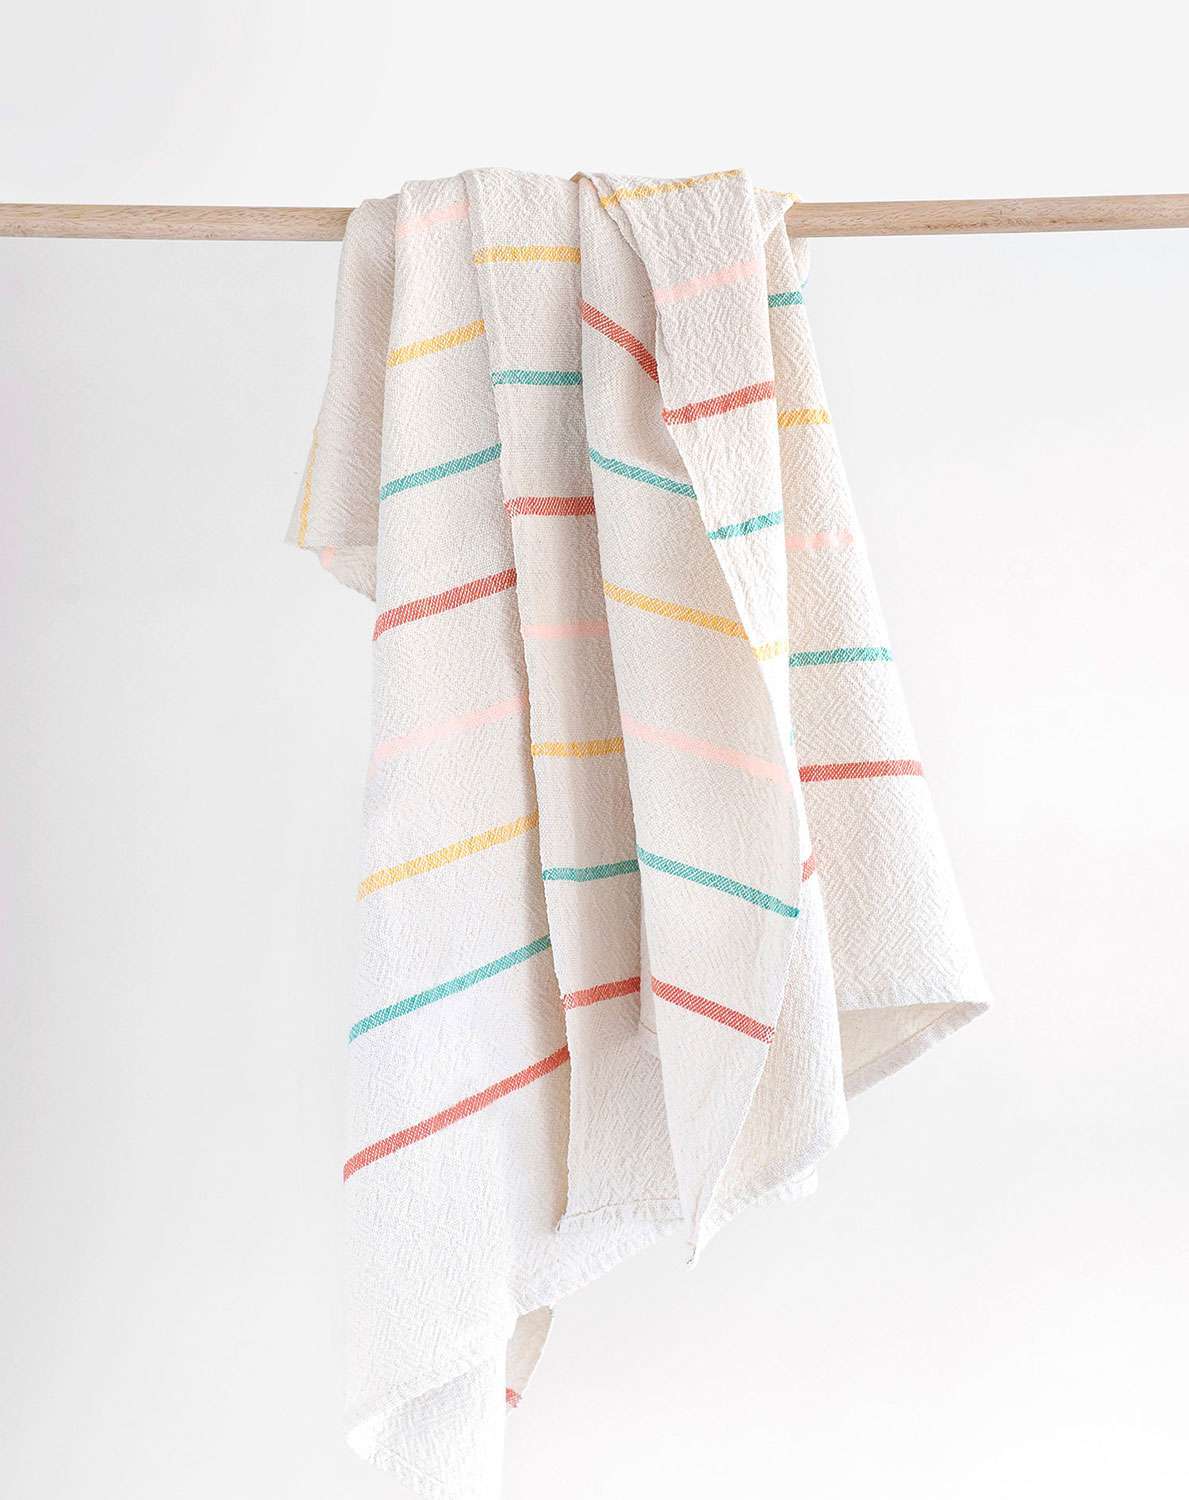 BHW - Large Country Towel - Stripes Throughout - Candy